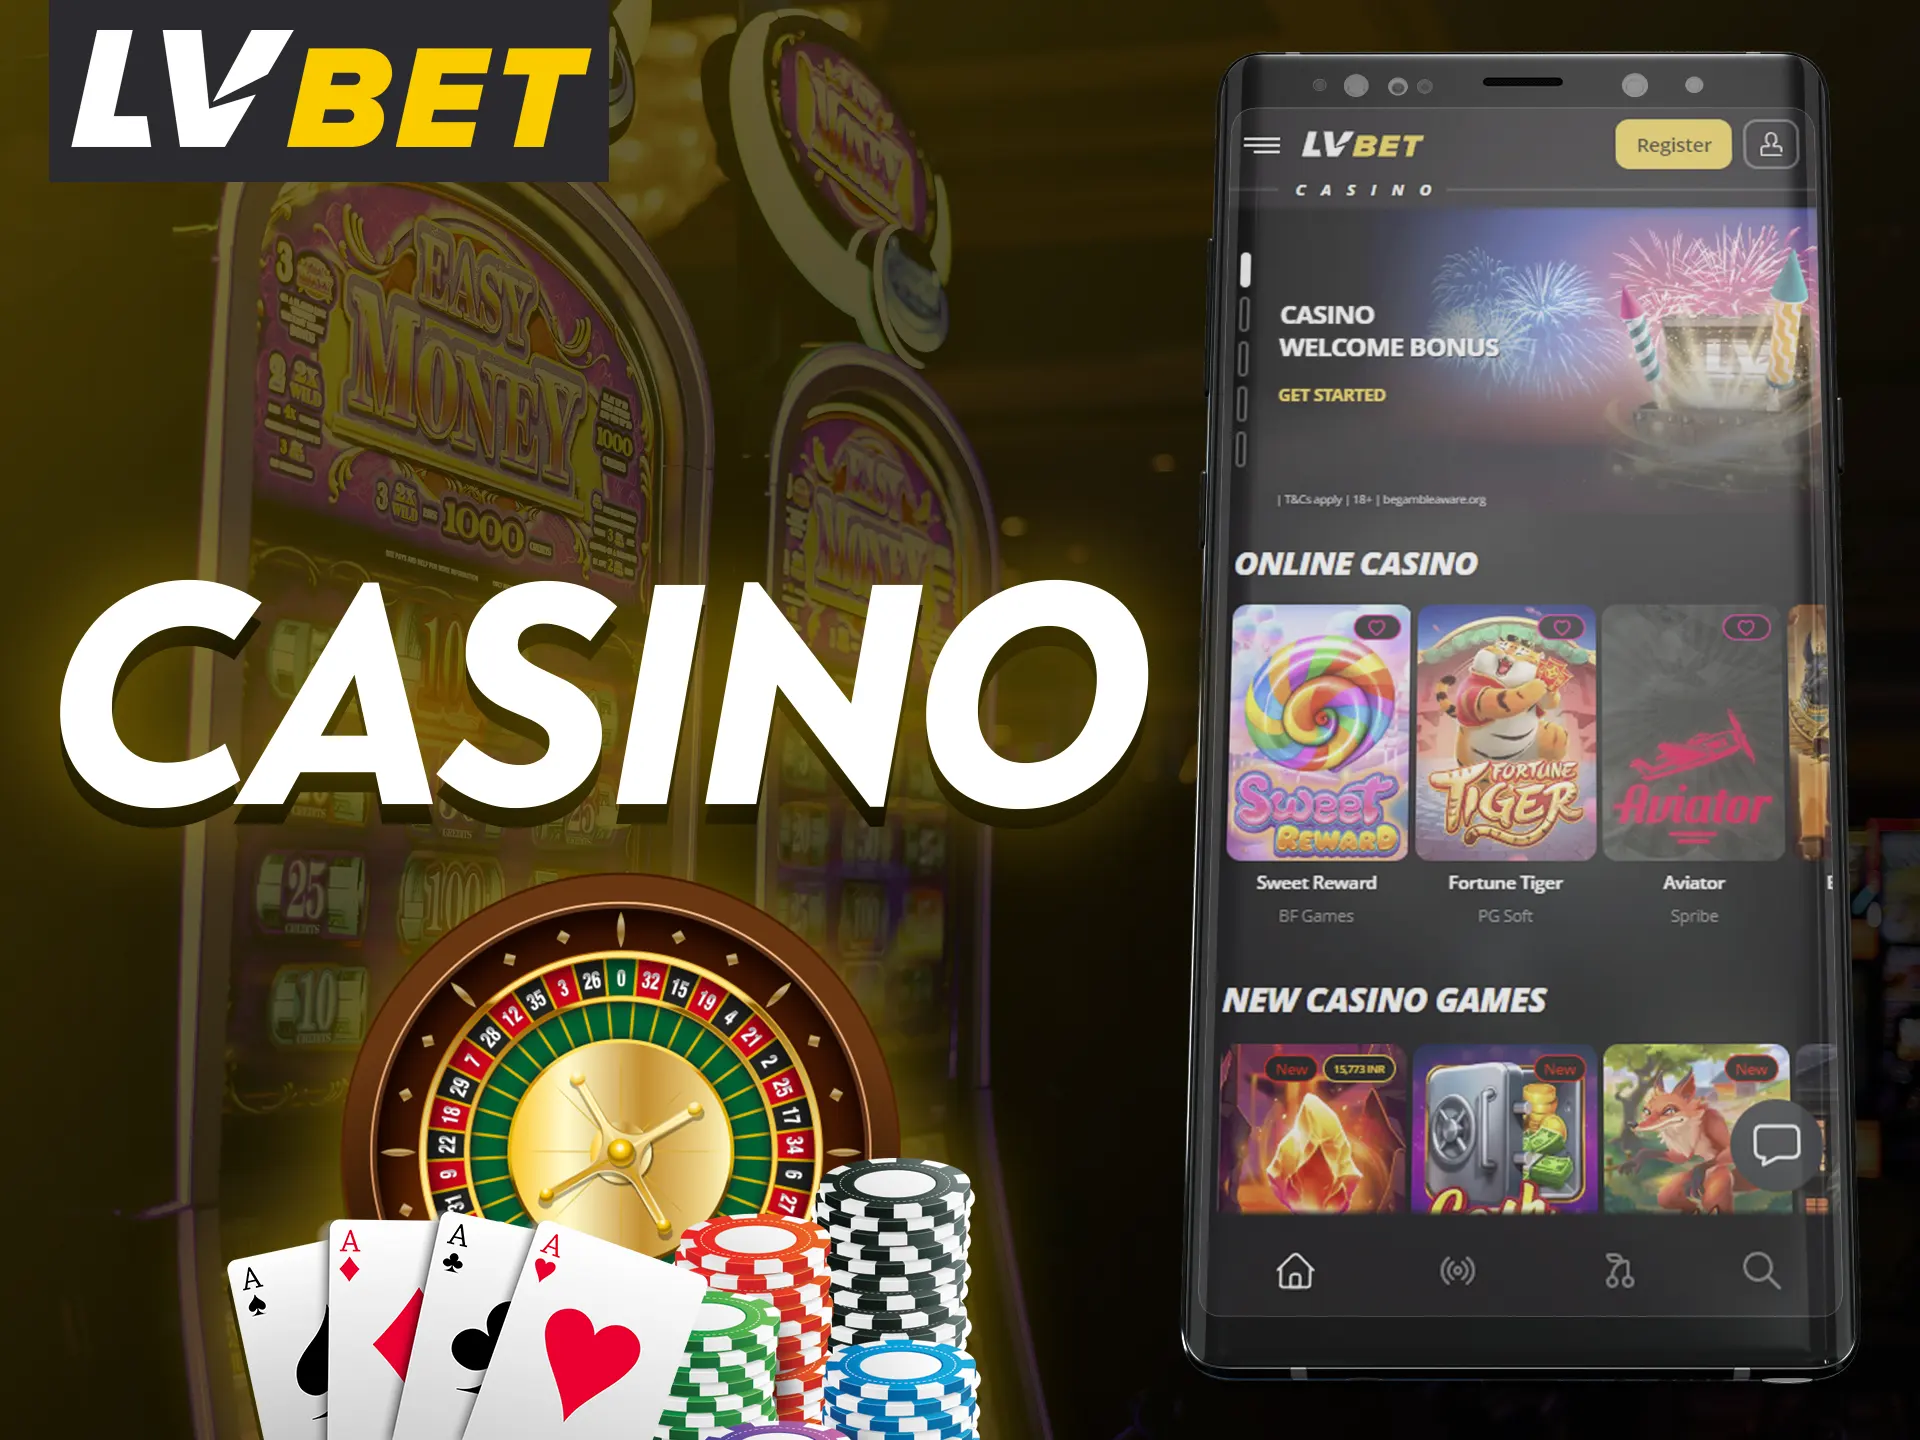 Be sure to visit the casino section of the LV Bet app.